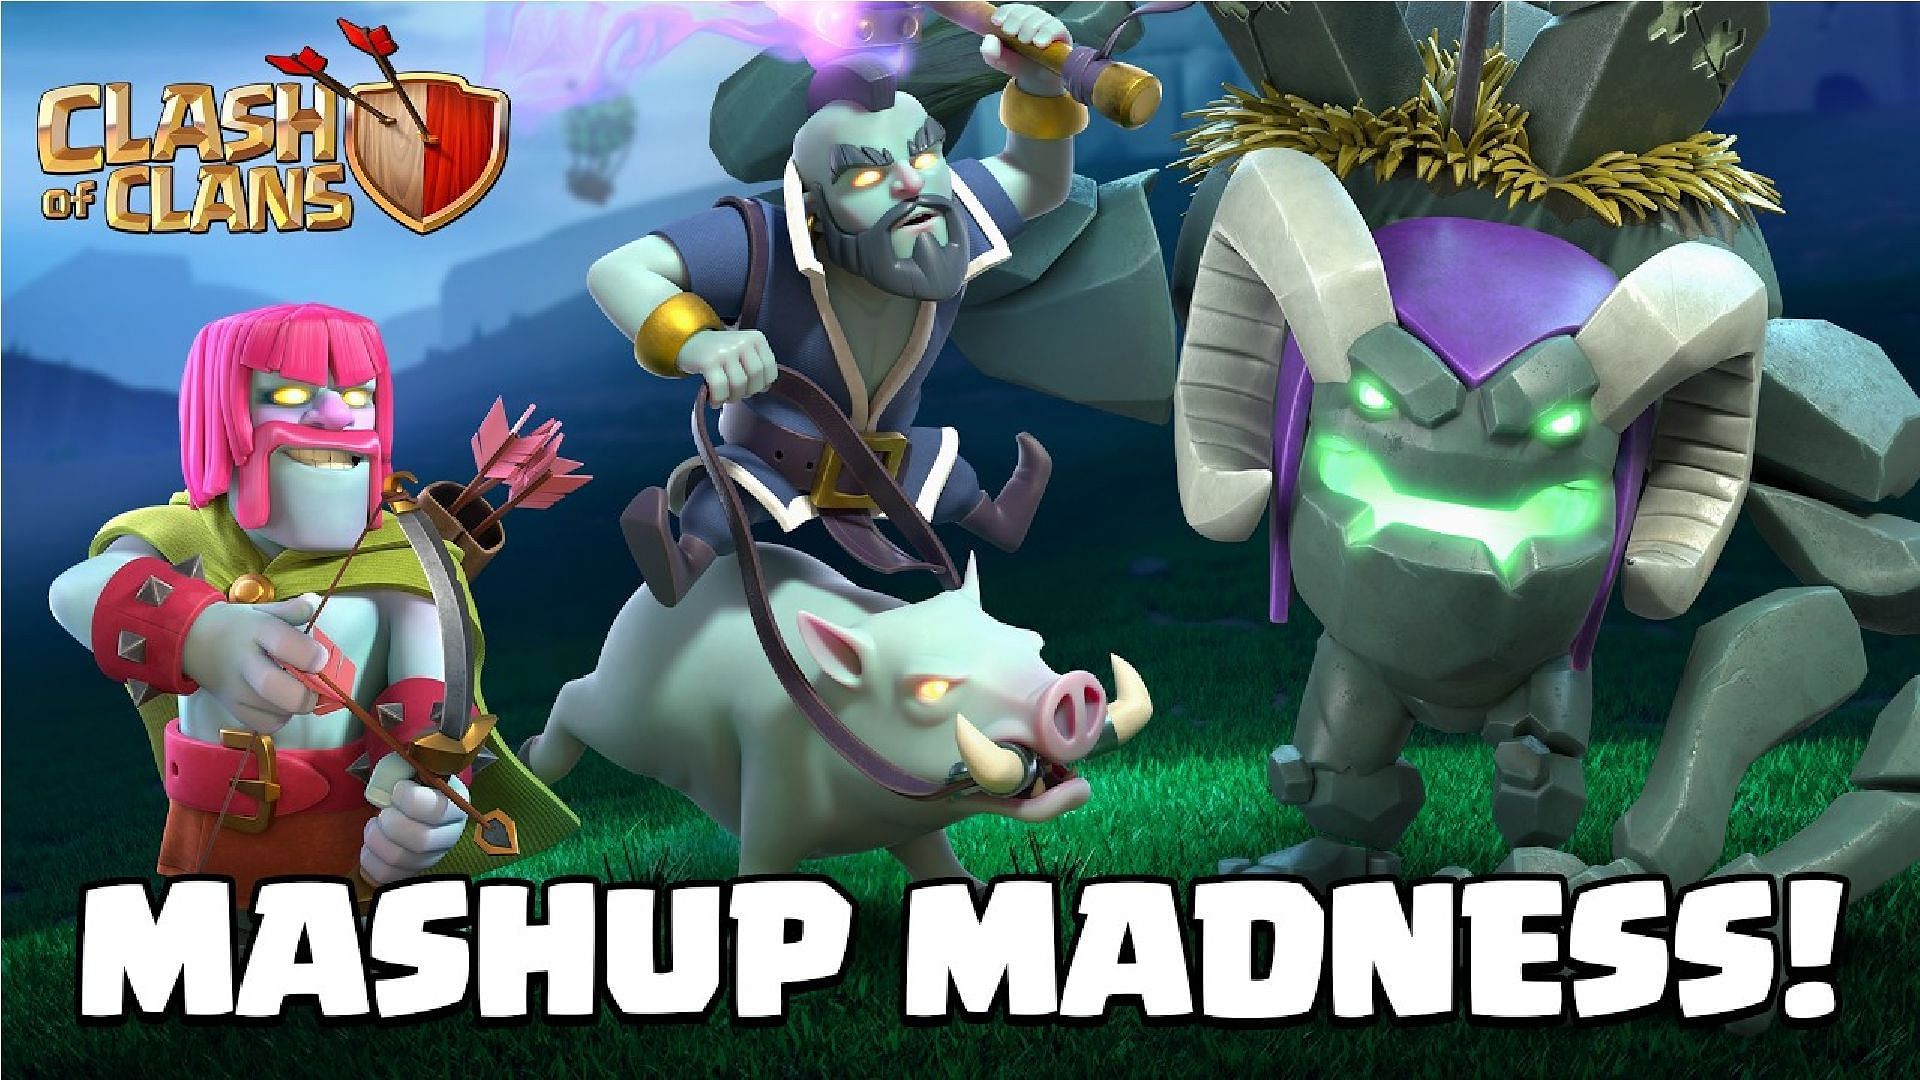 Clash of Clans Mashup Madness event